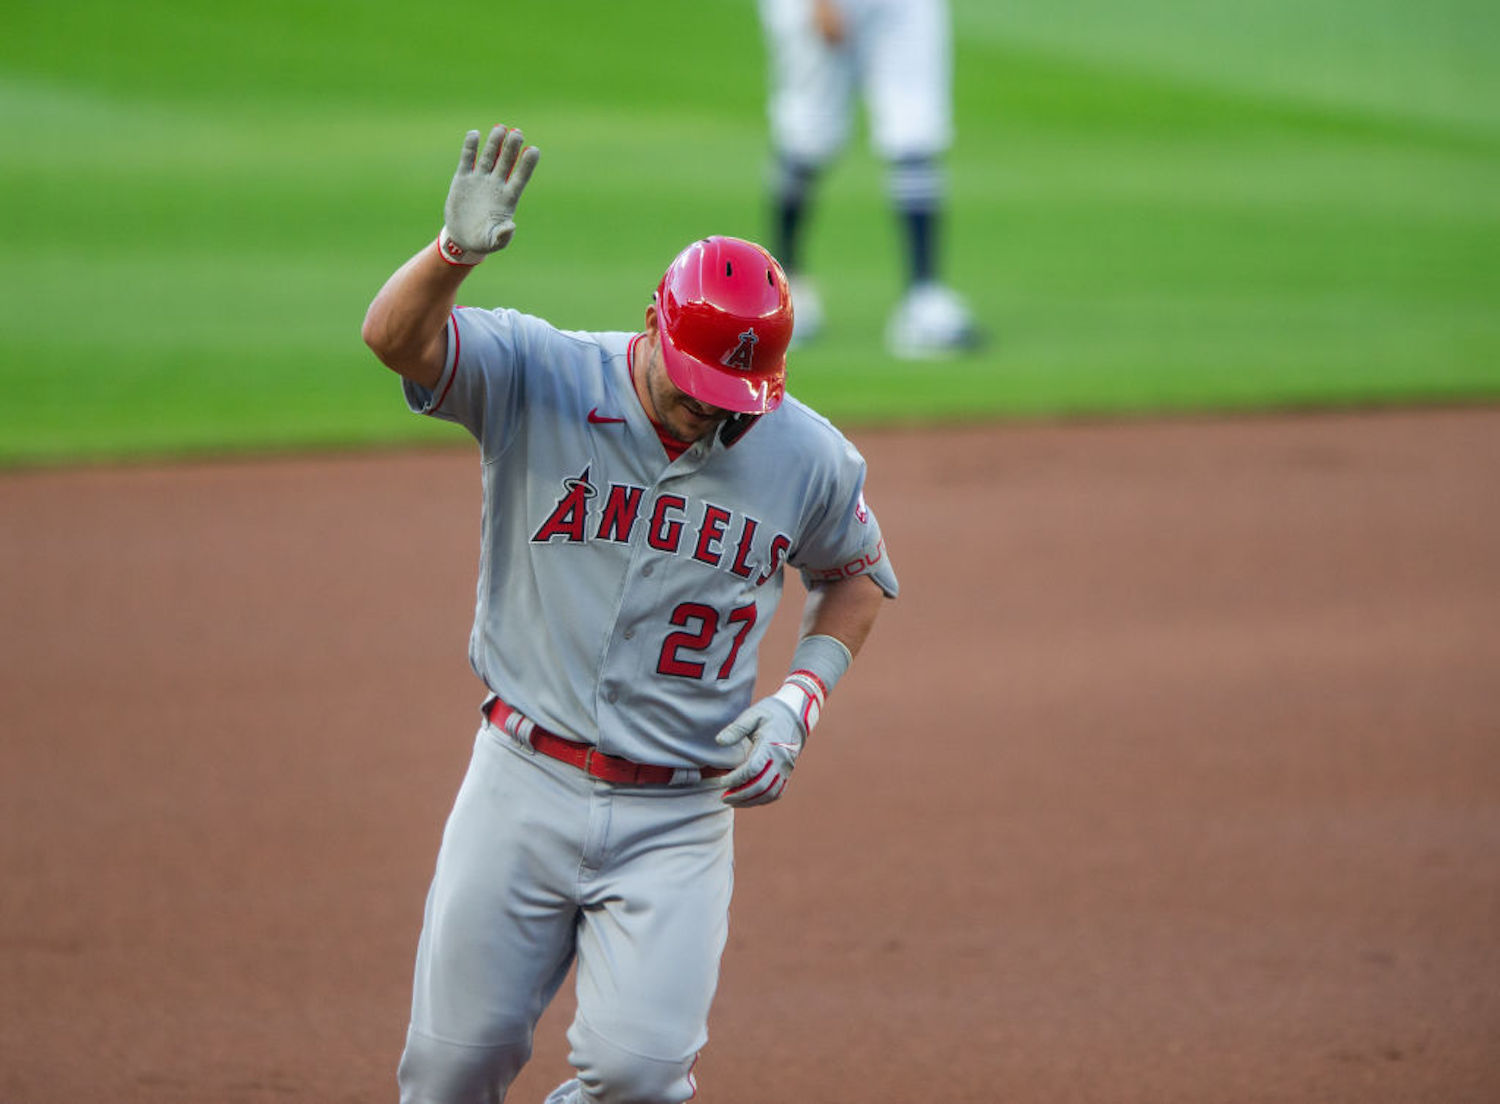 Mike Trout Passes Honus Wagner For the Most Expensive Baseball Card Ever Sold